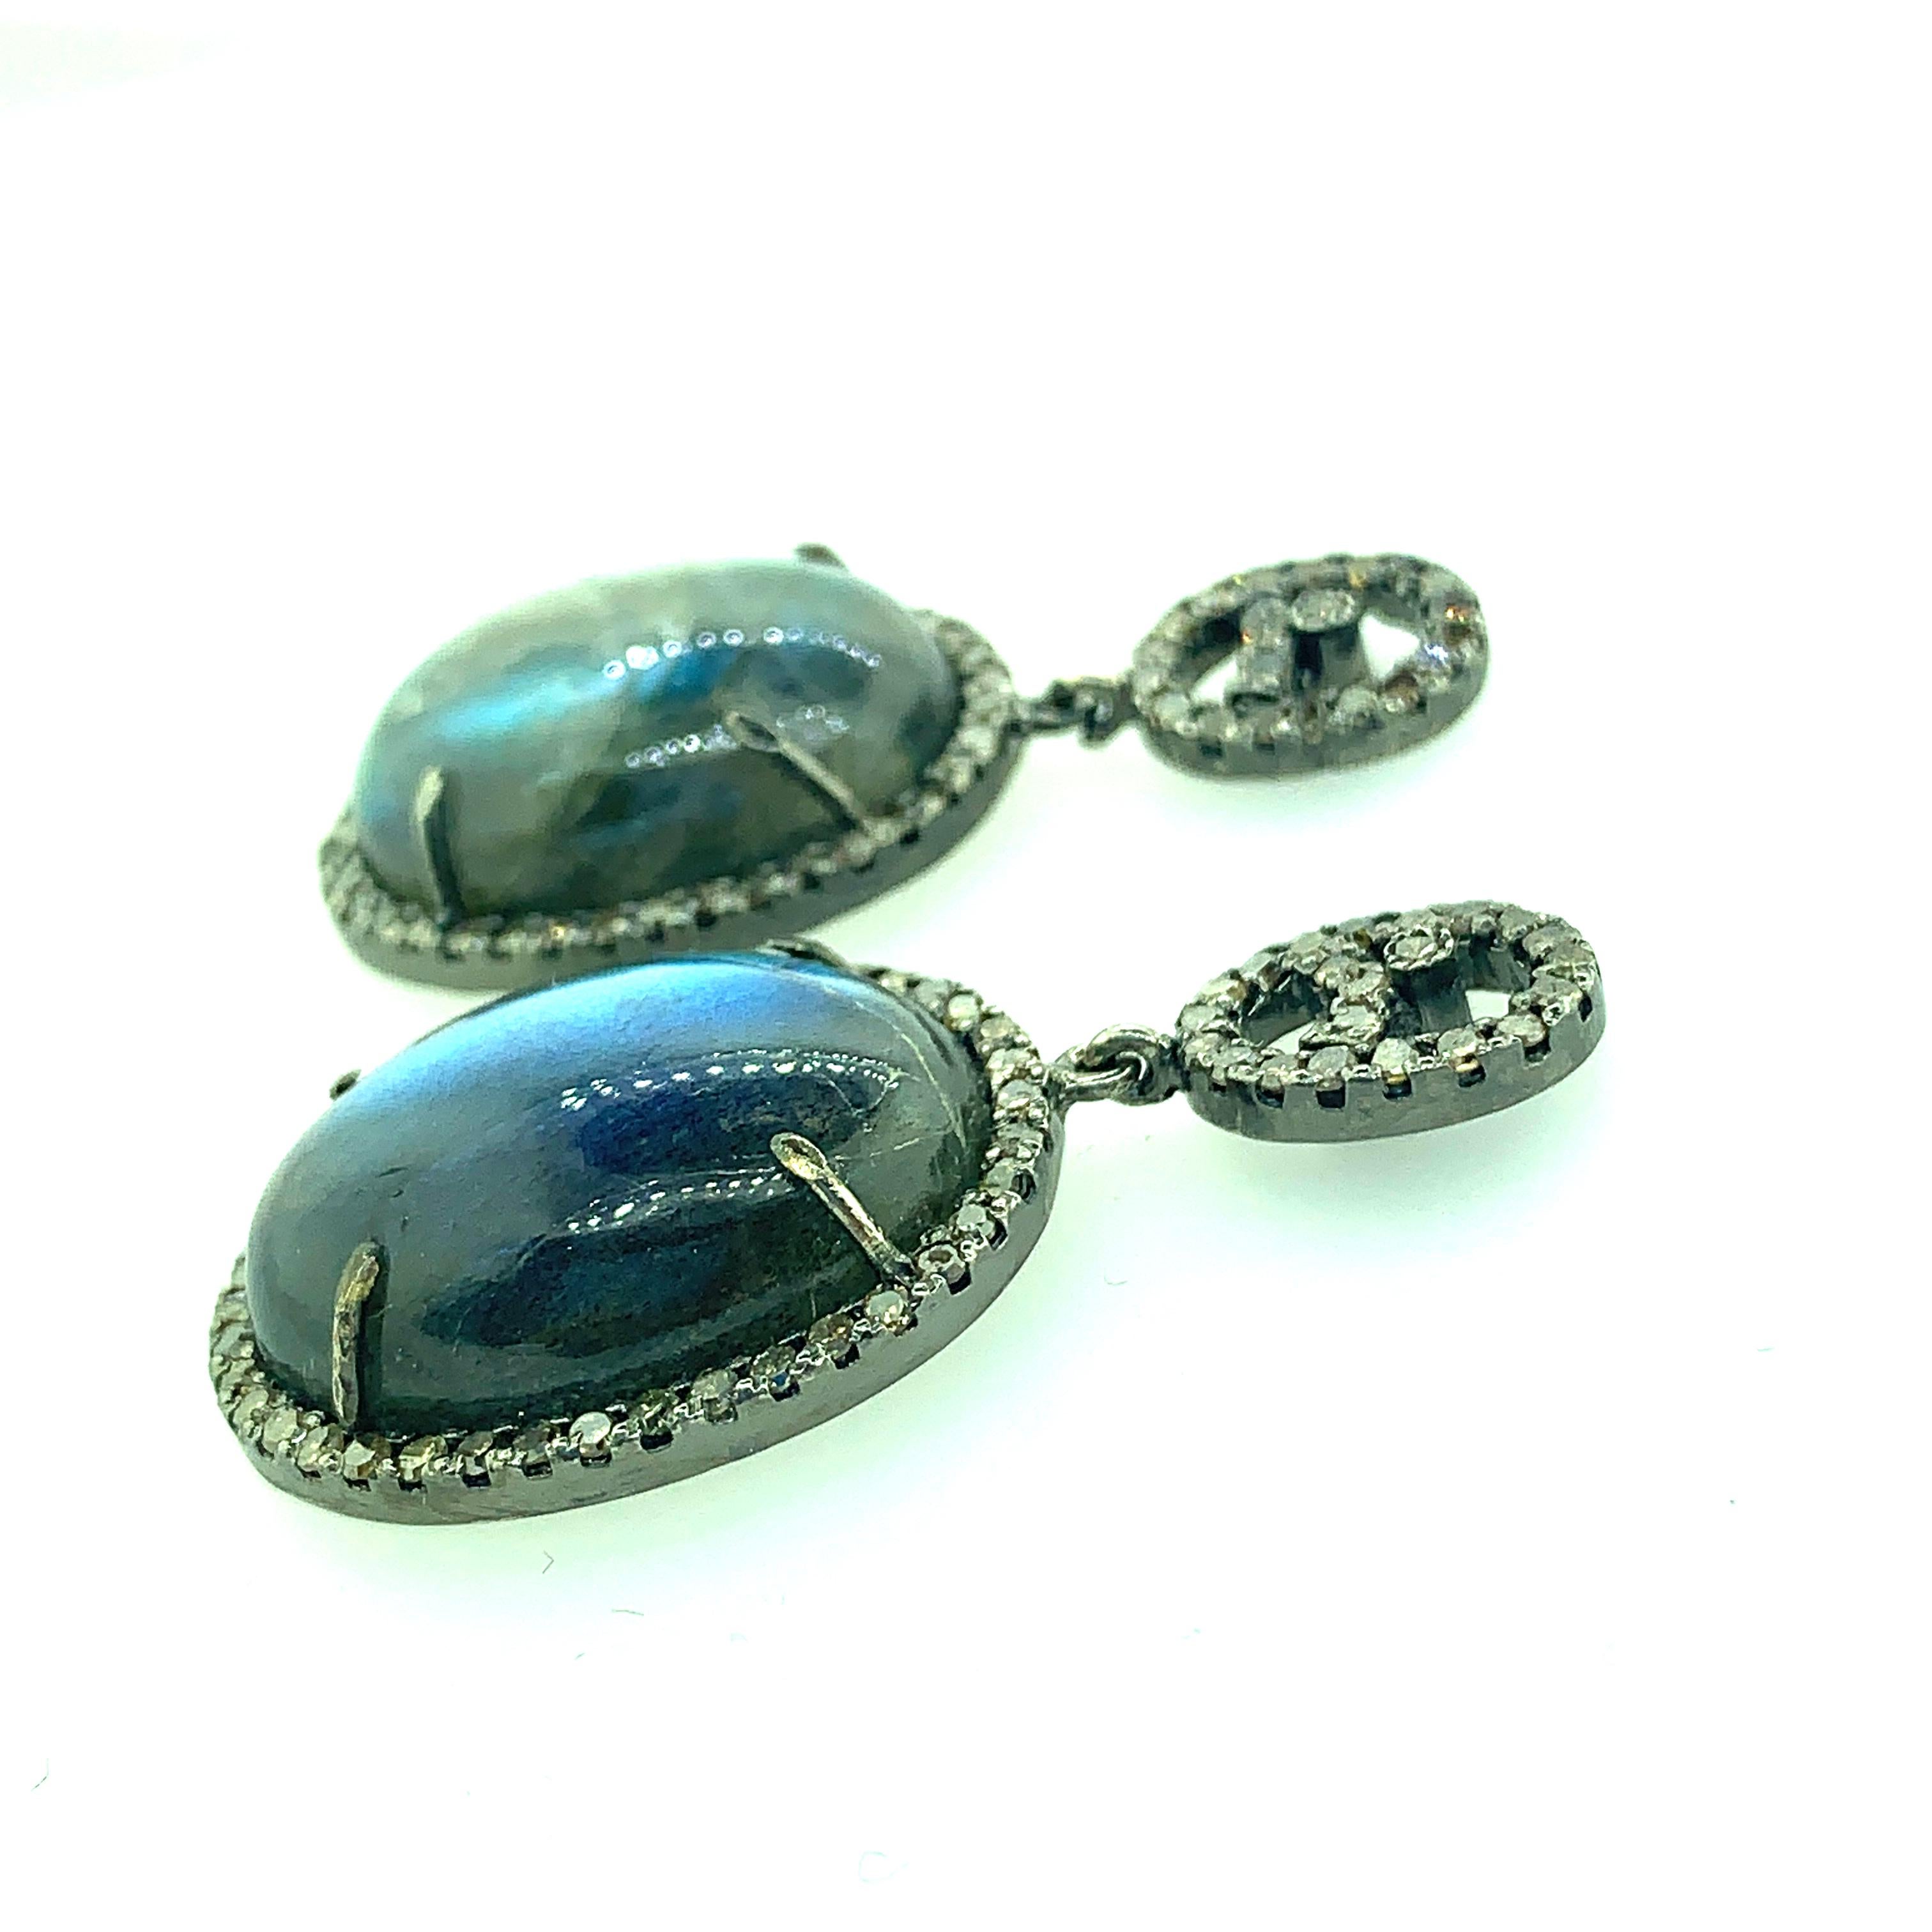 1.75 Inch Long 36.35 ct Labradorite and 2.00 ct Champagne Diamond Earring set in Oxidized Sterling Silver with pure 14K Gold post. The Labradorite is a feldspar mineral of the plagioclase series that is most often found in mafic igneous rocks such